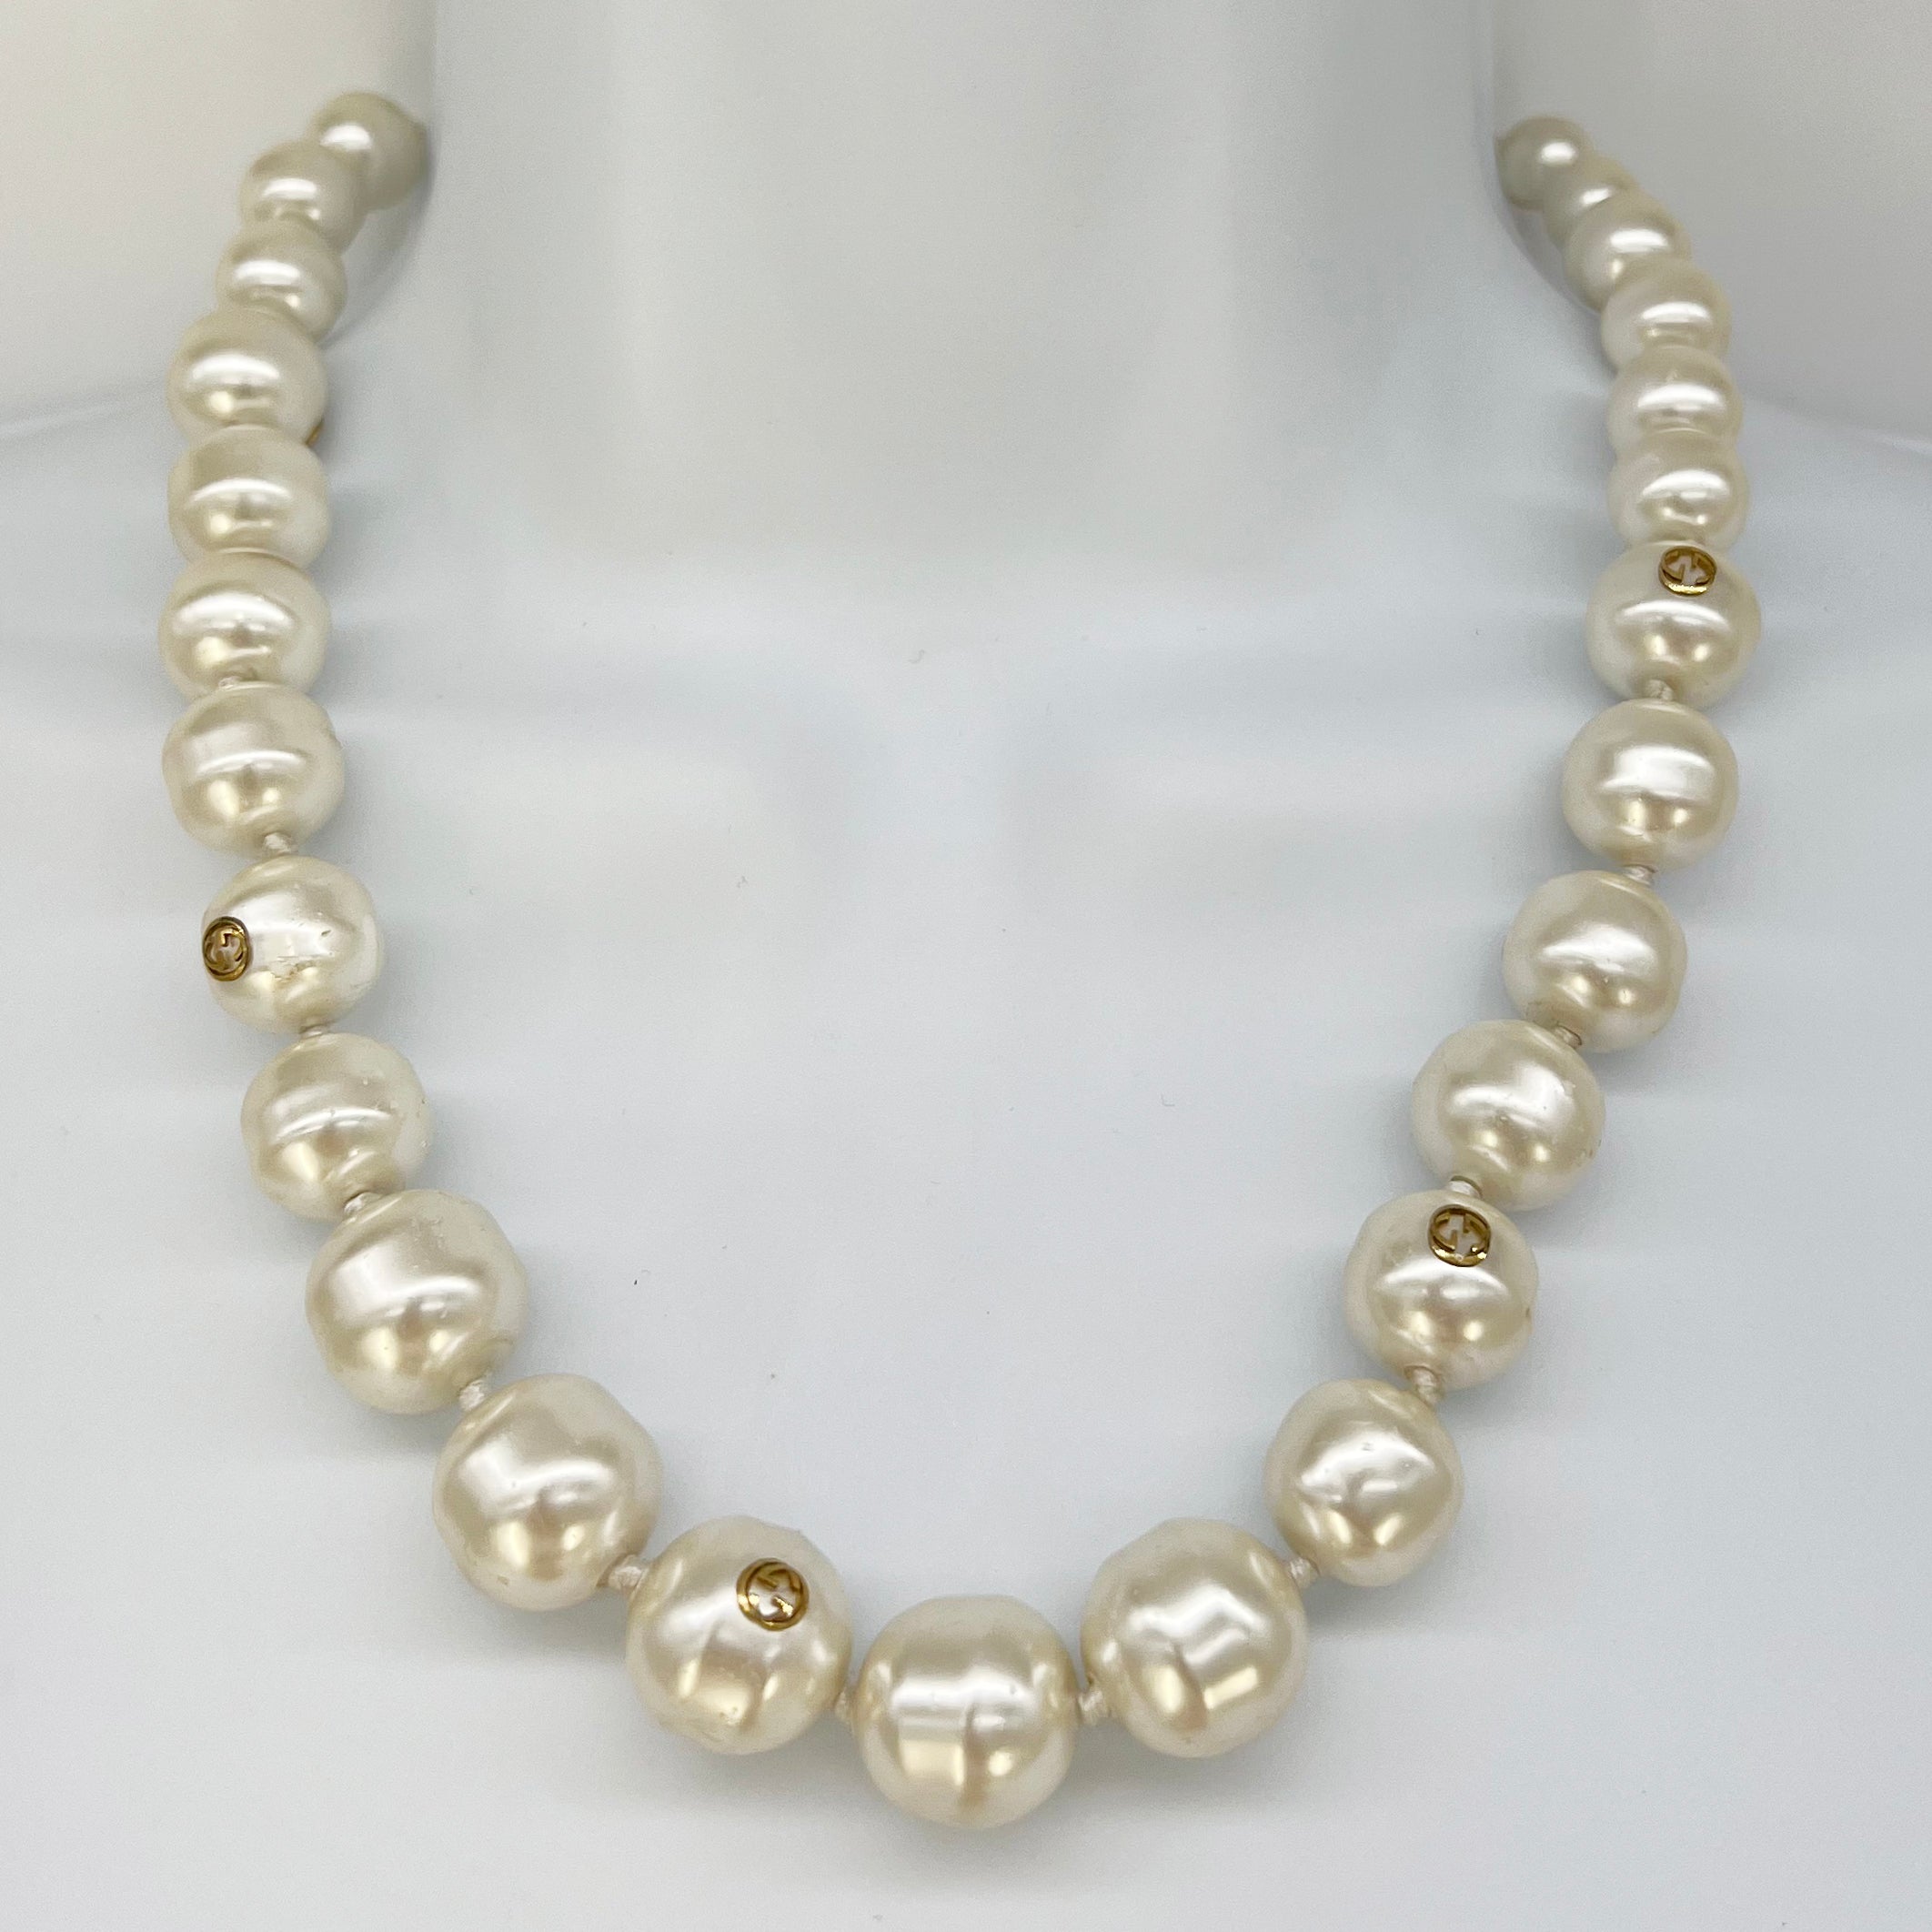 Designer Fresh Water Pearl Necklace with Authentic Louis Vuitton